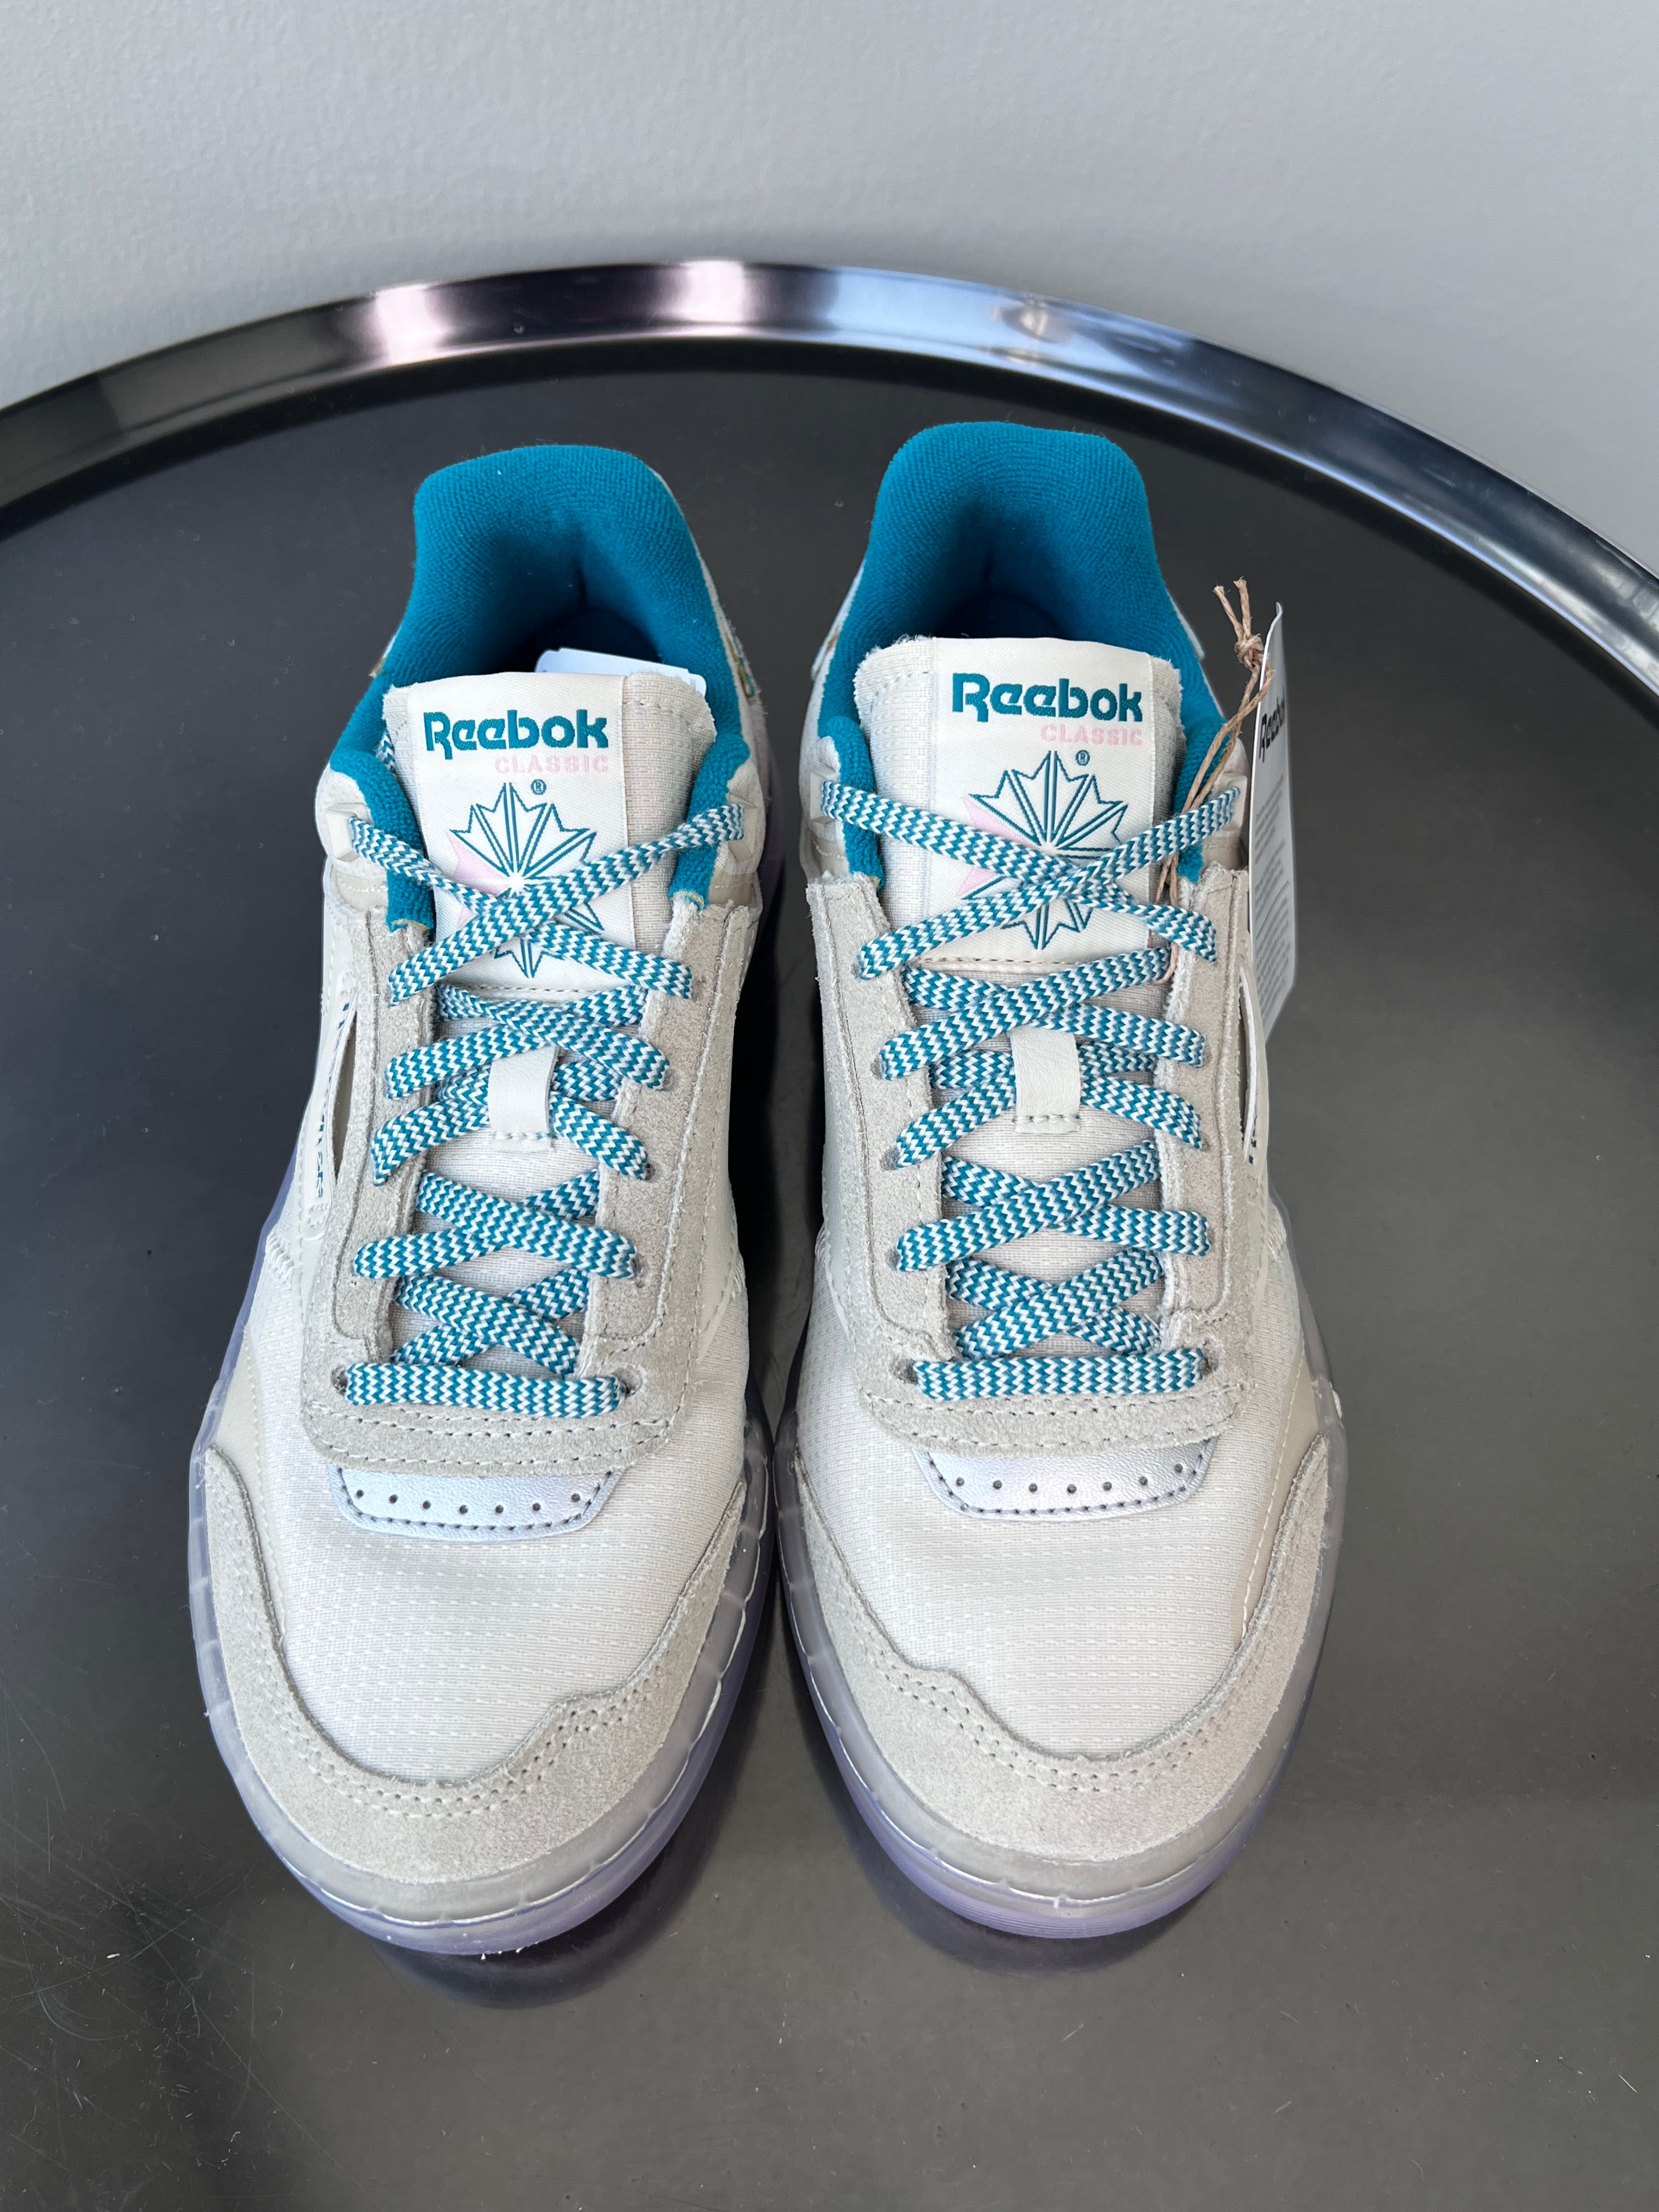 Cream and turquoise tennis shoes - REEBOK